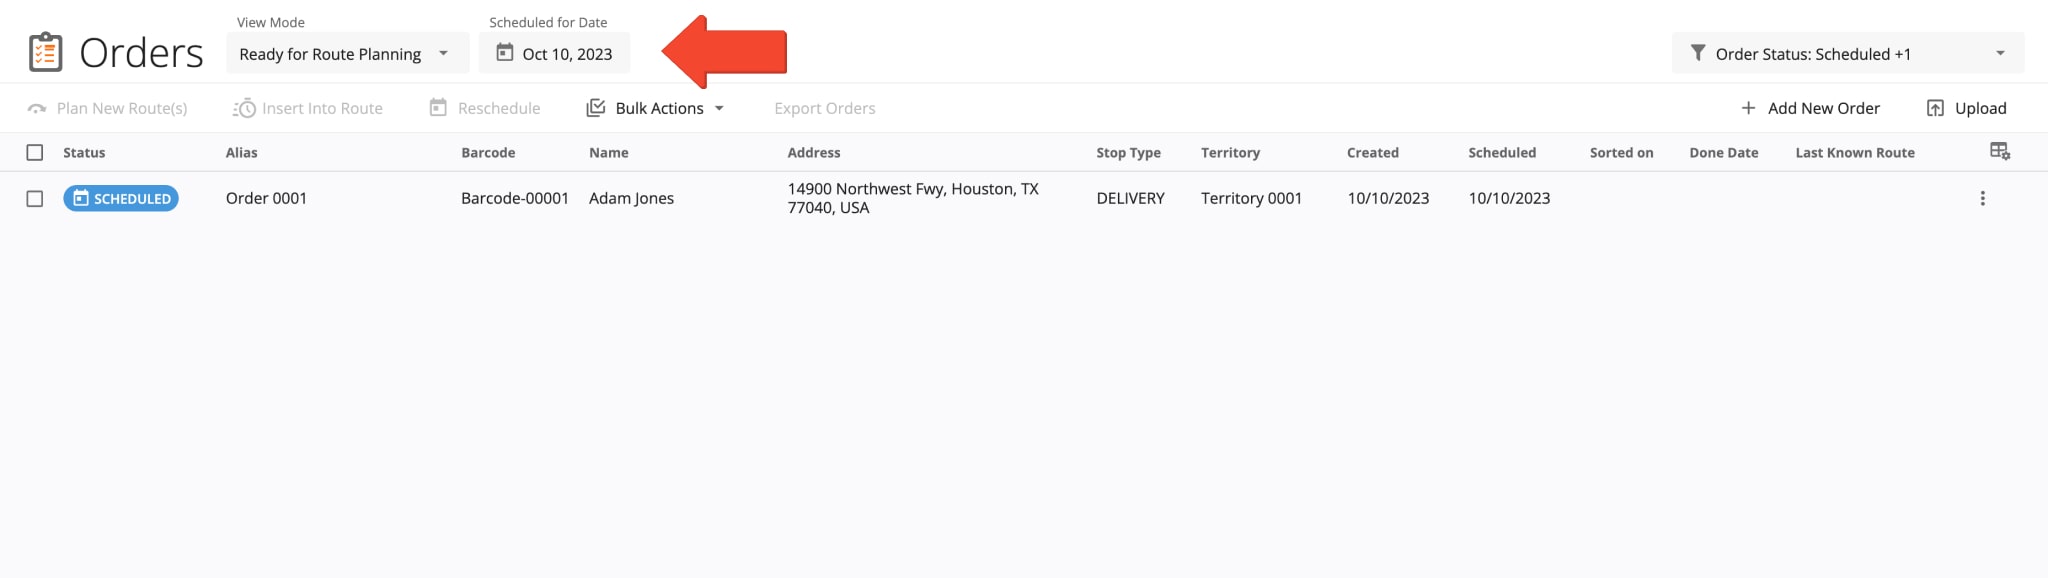 New created orders have the Scheduled order status and can be used for planning and optimizing routes.